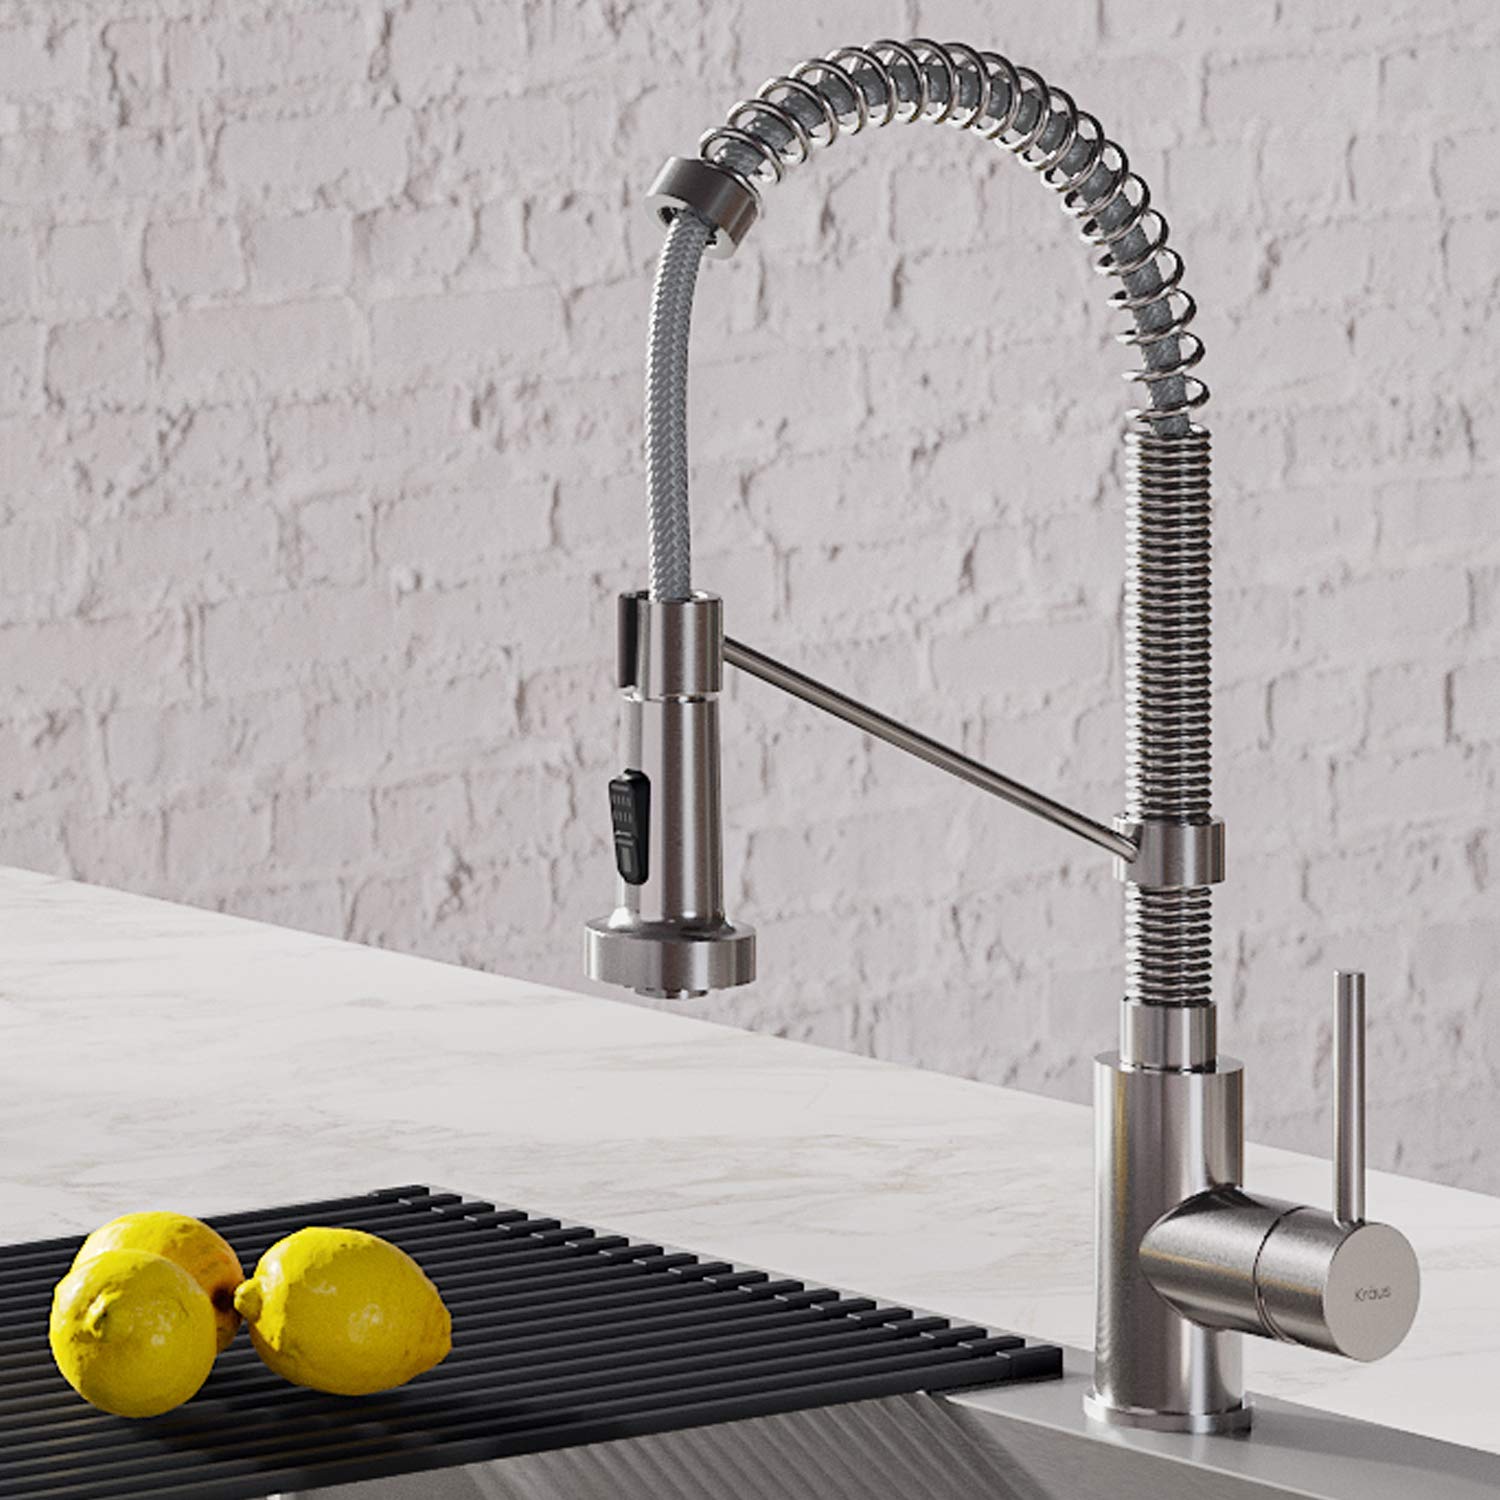 The 10 Best Kitchen Faucets (Reviewed & Compared in 2021)